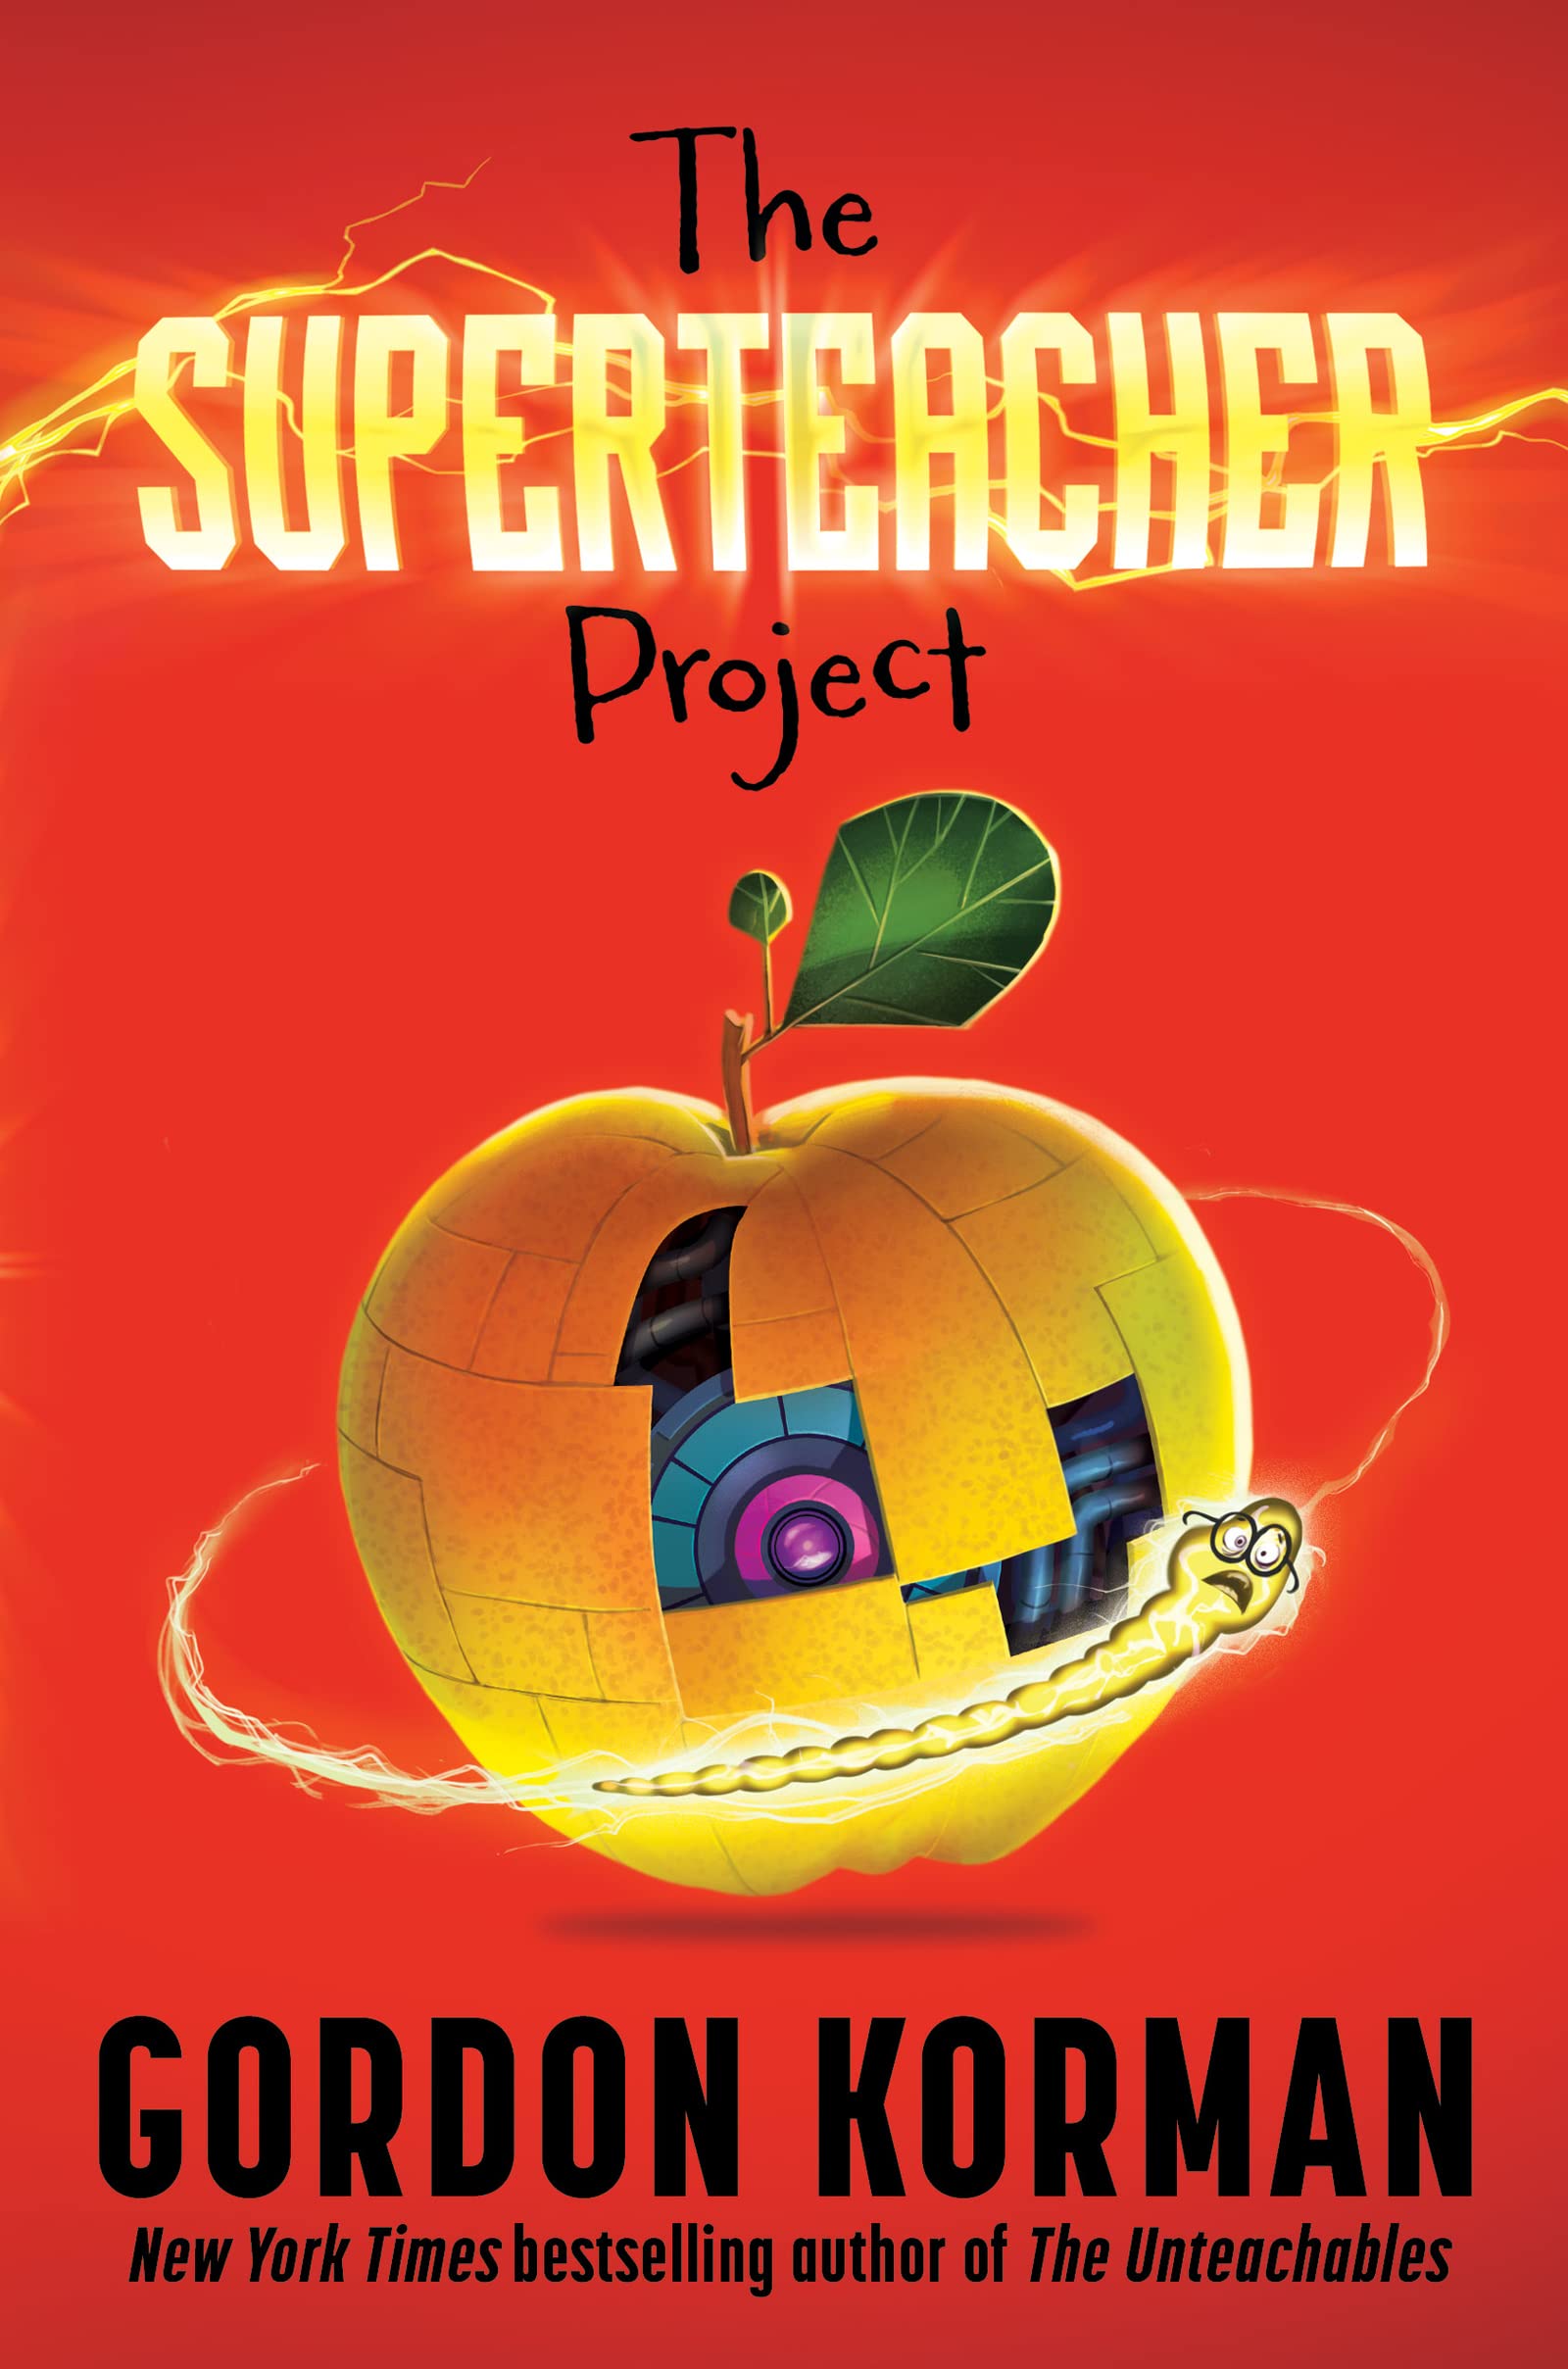 The Superteacher Project—25 Best New Books for 7th Graders